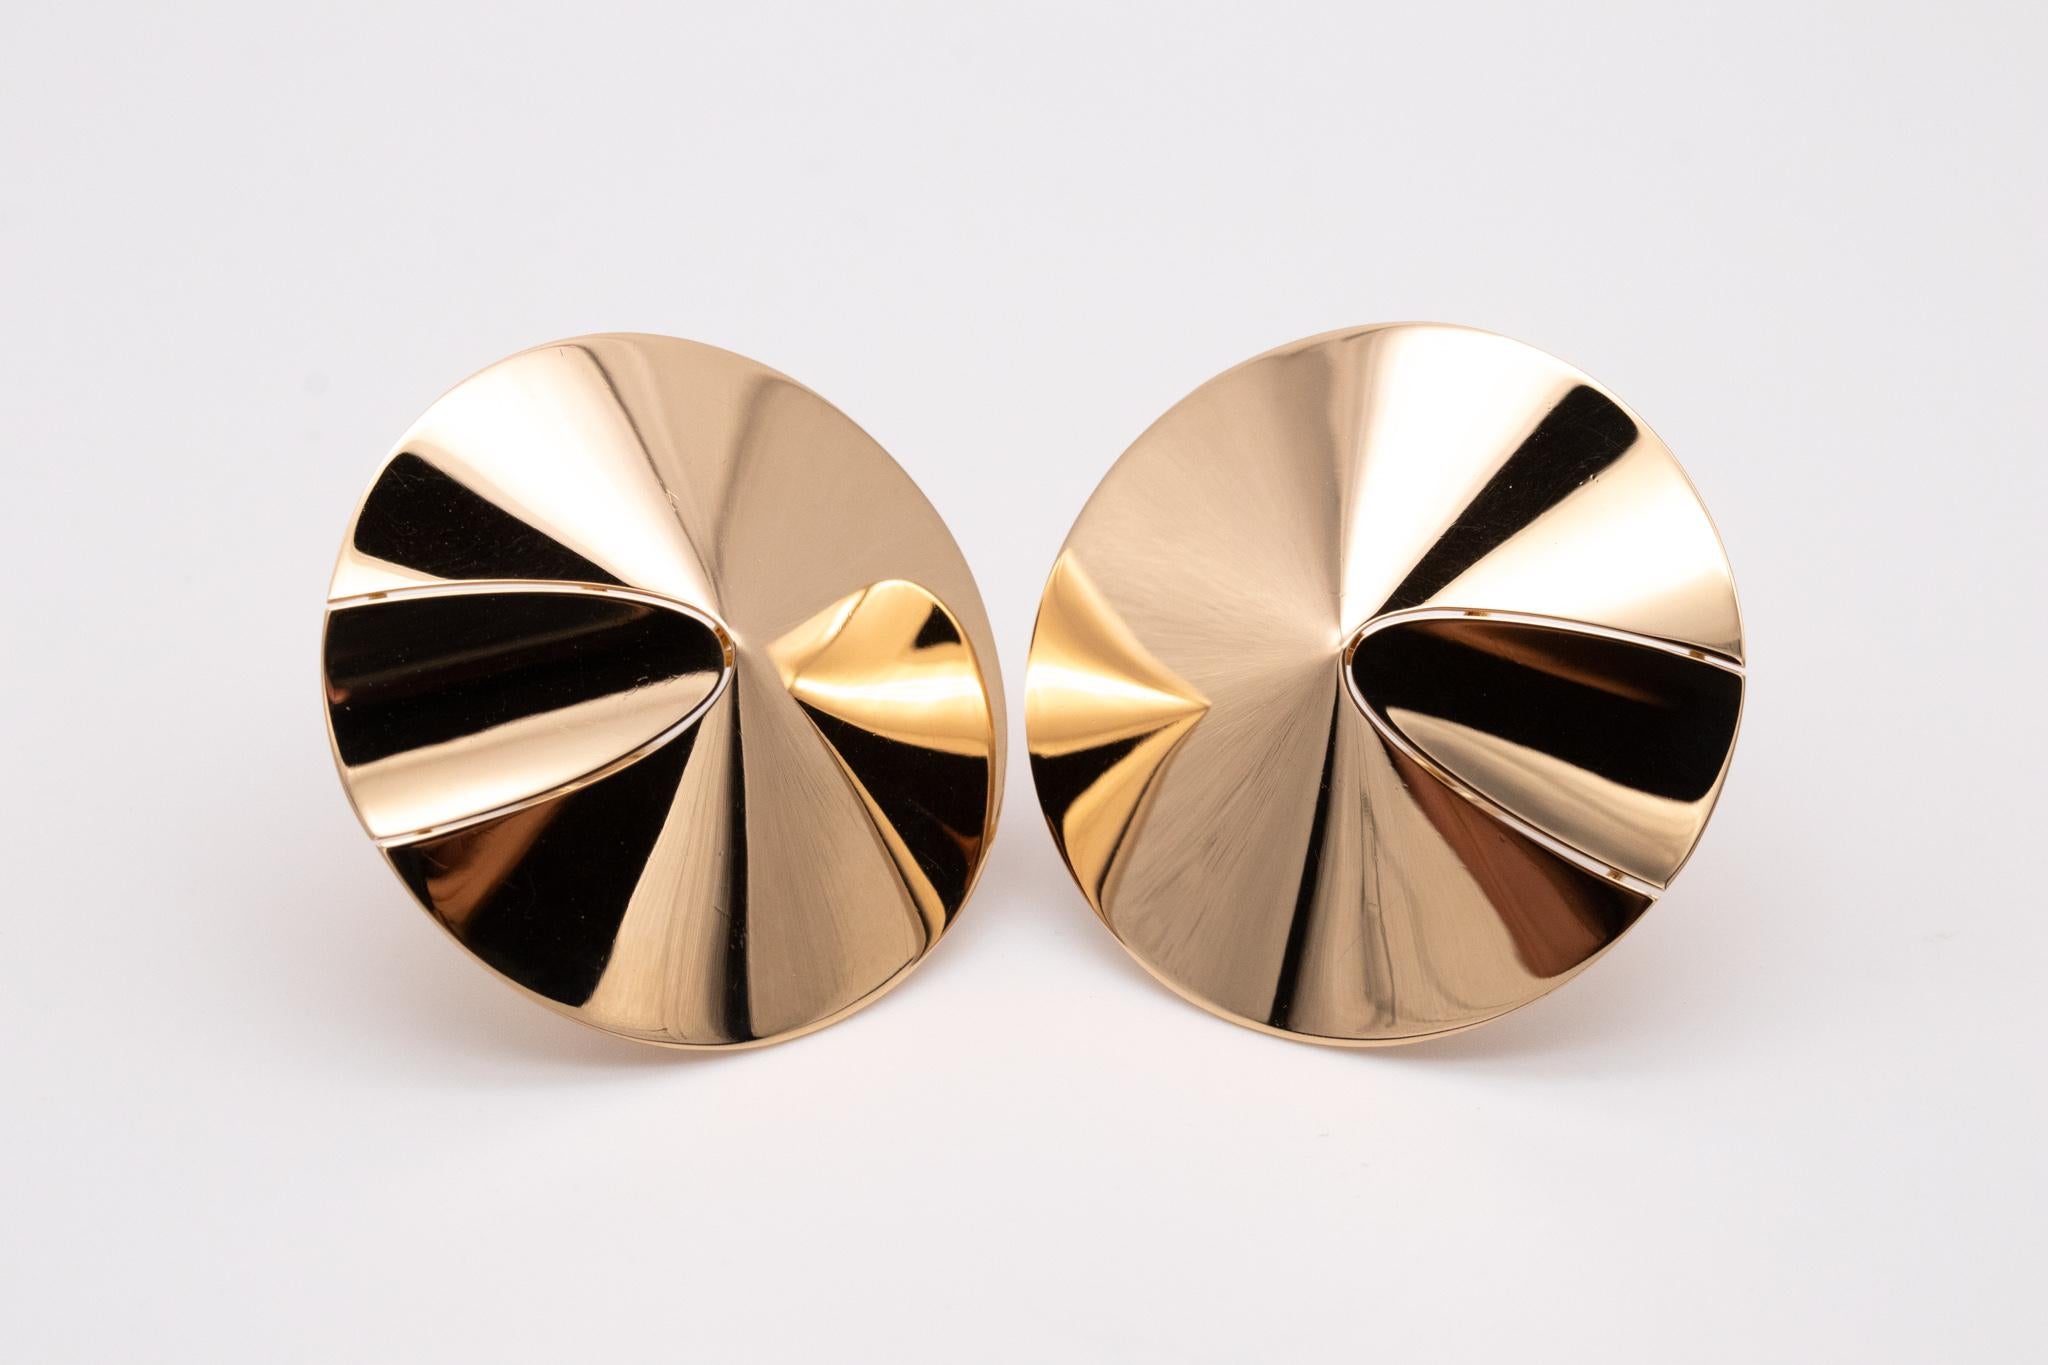 Trudel by Kurt Aepli 1970 Swiss Geometric Clips Earrings in Polished 18kt Gold In Excellent Condition For Sale In Miami, FL